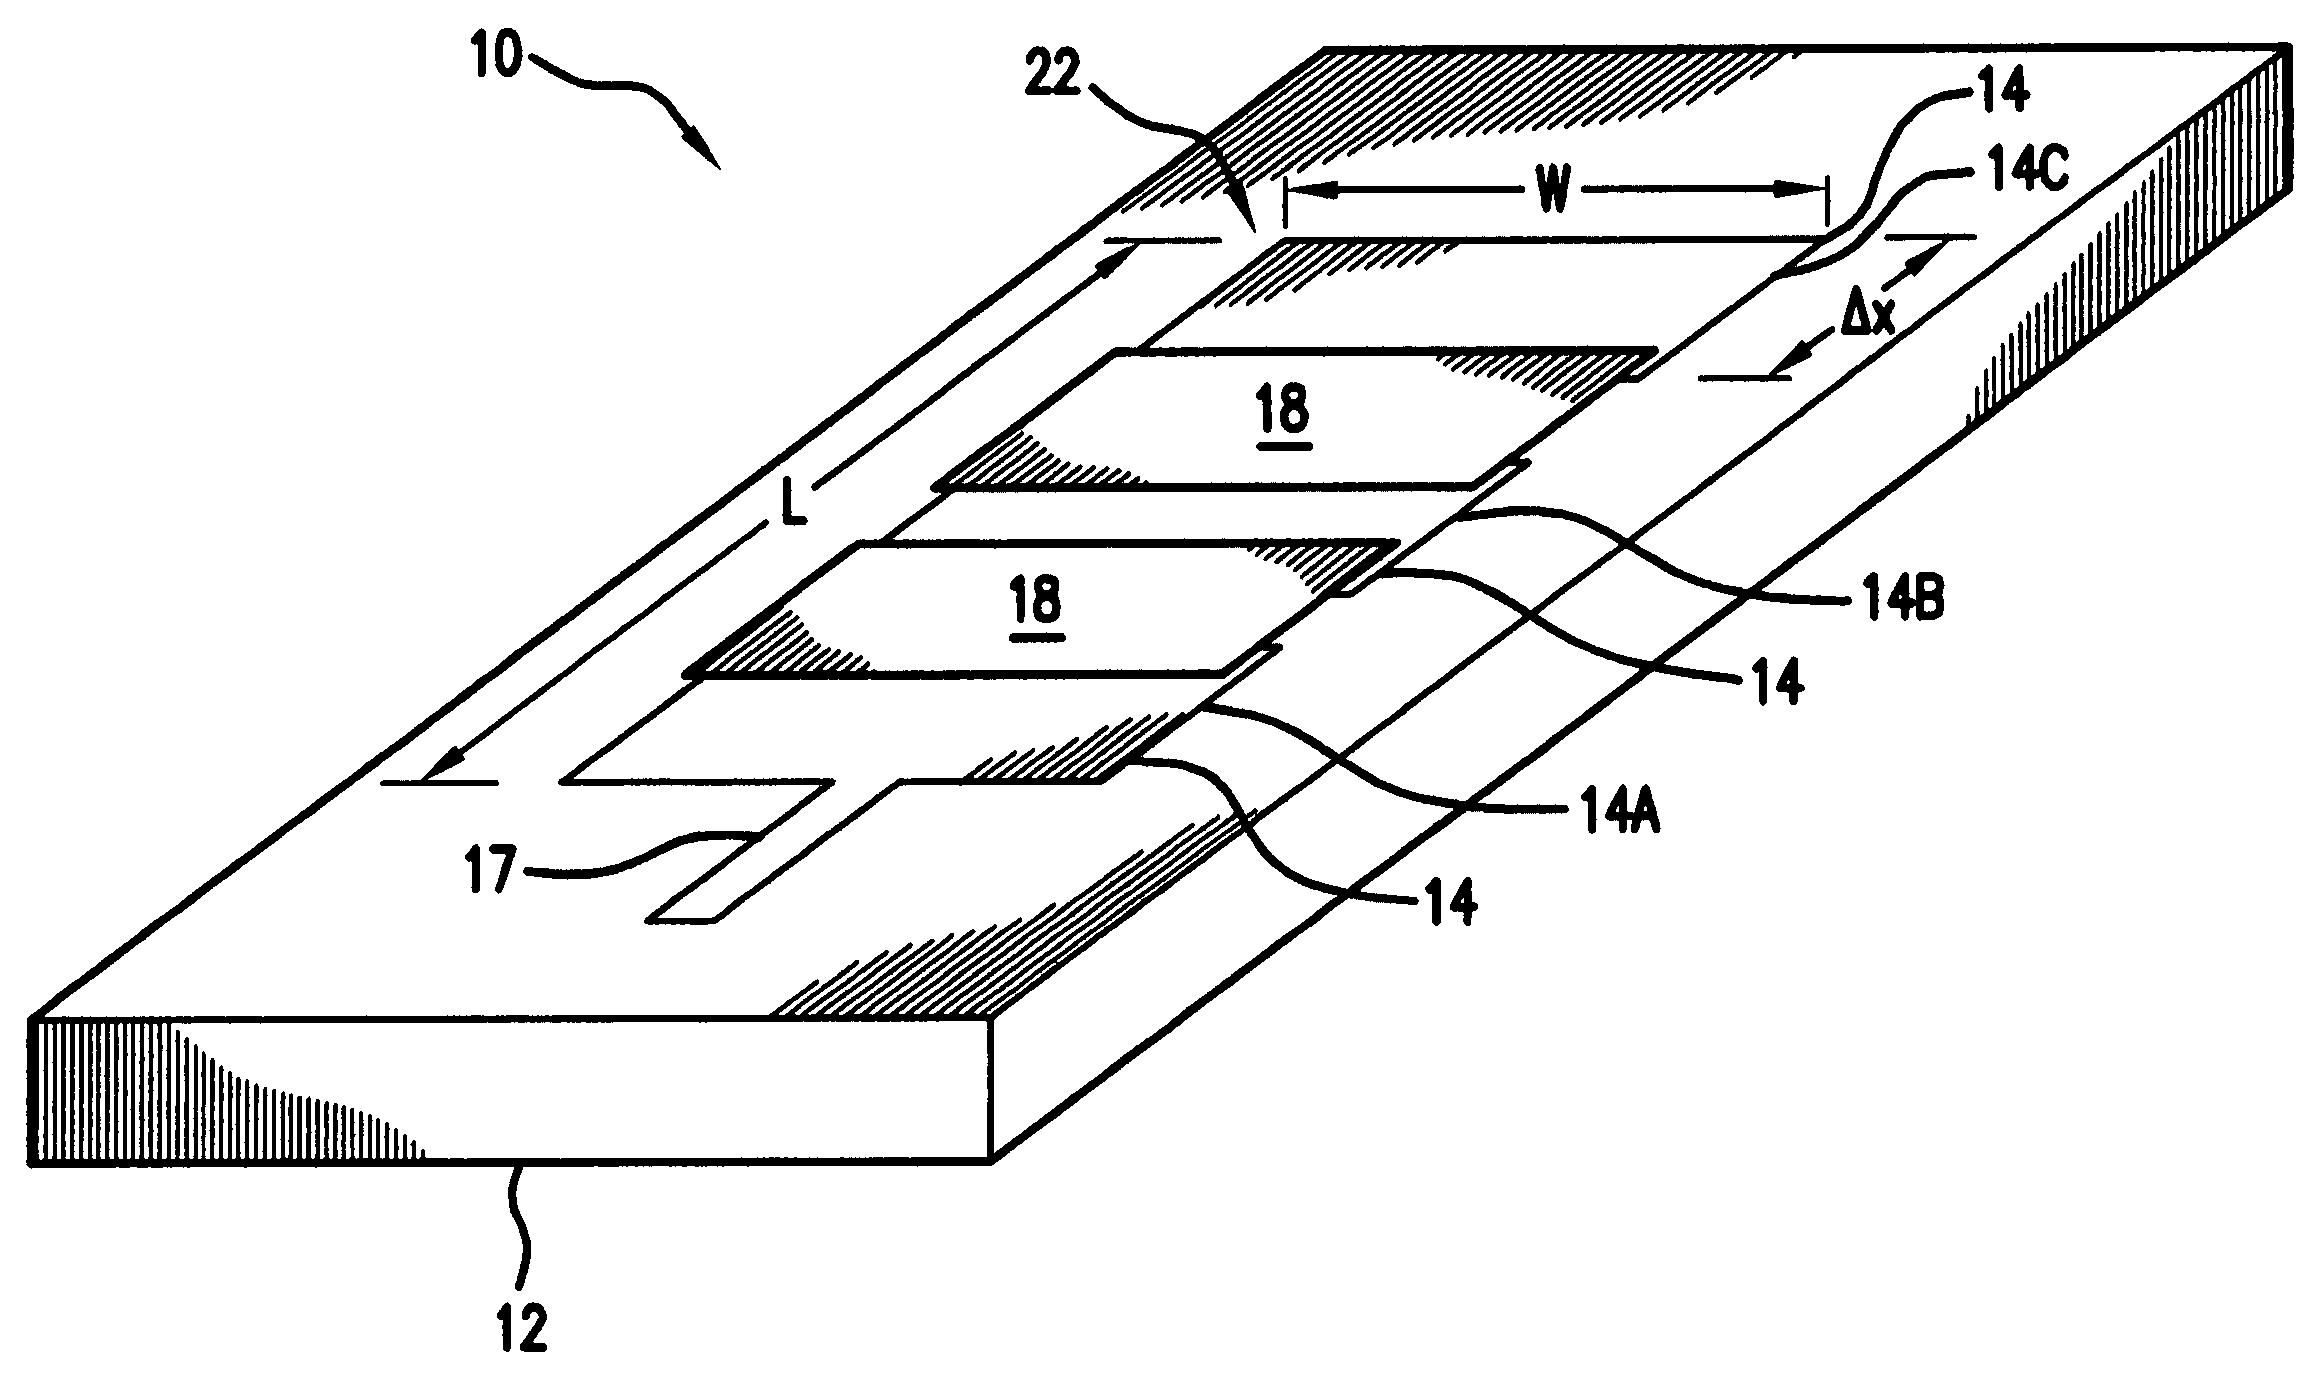 Segmented microstrip patch antenna with exponential capacitive loading